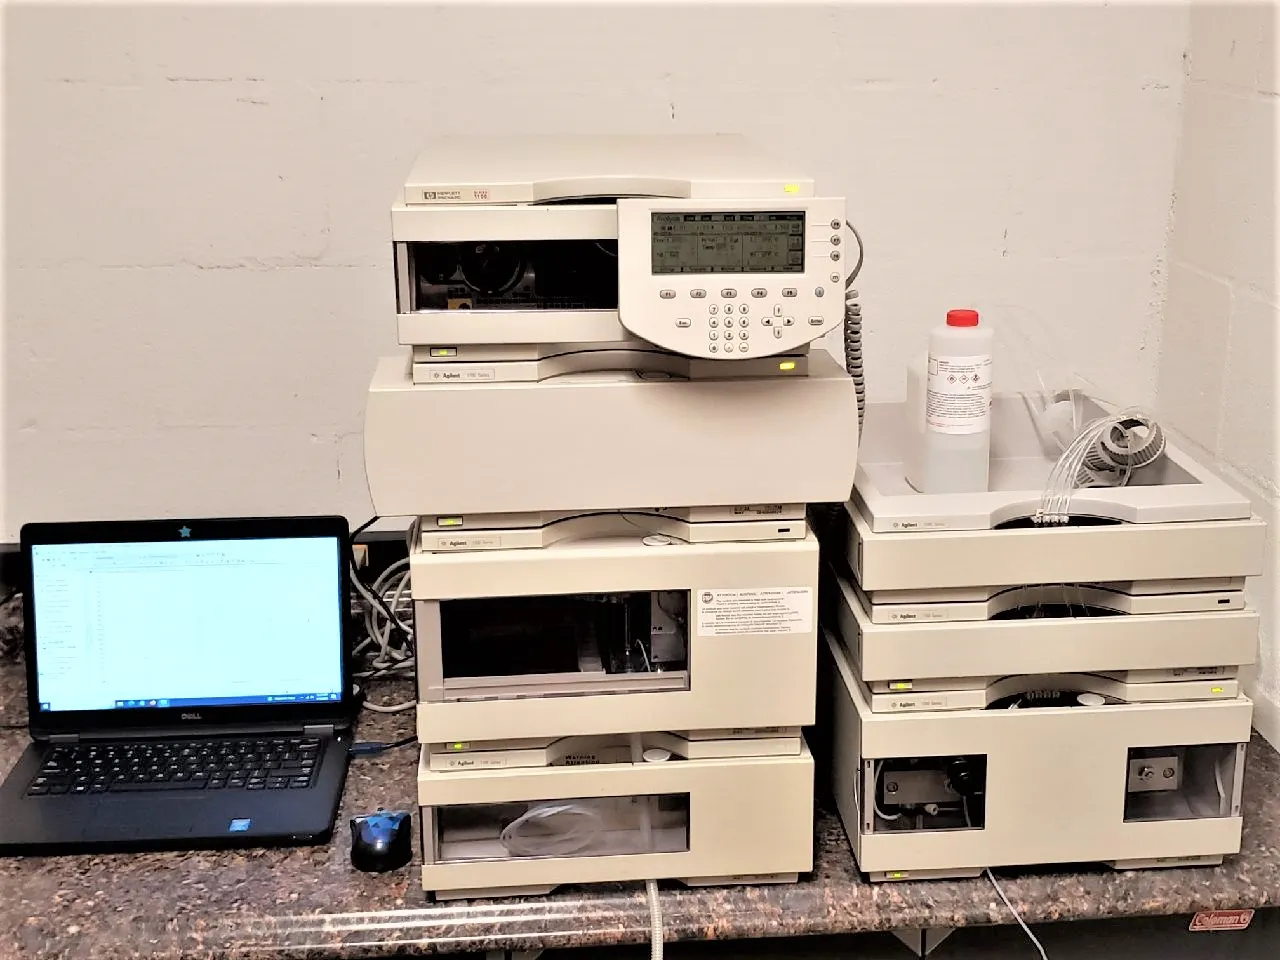 Agilent 1100 HPLC-DAD complete with data system